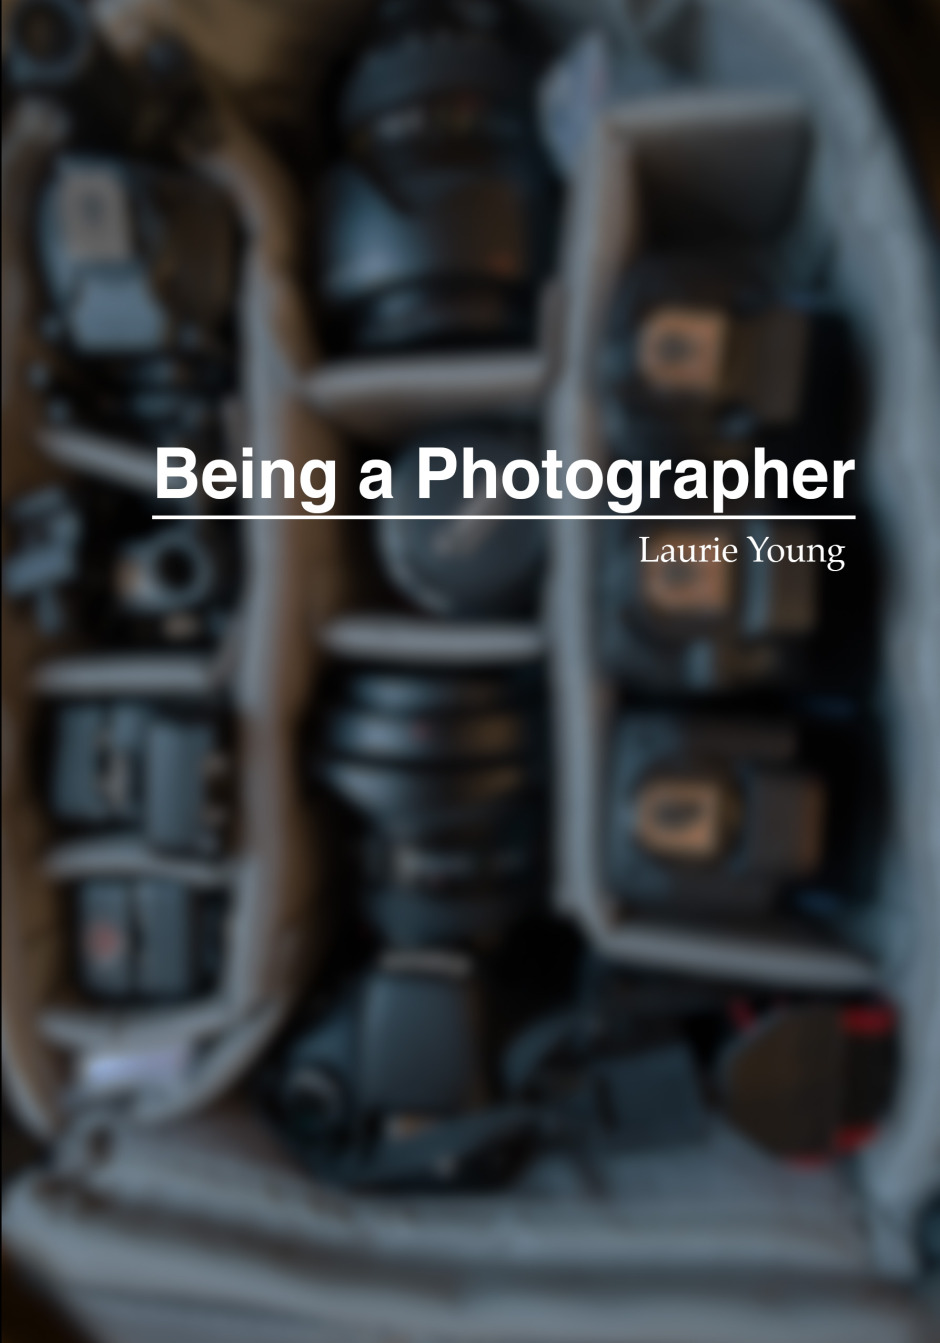 Being a Photographer by Laurie Young